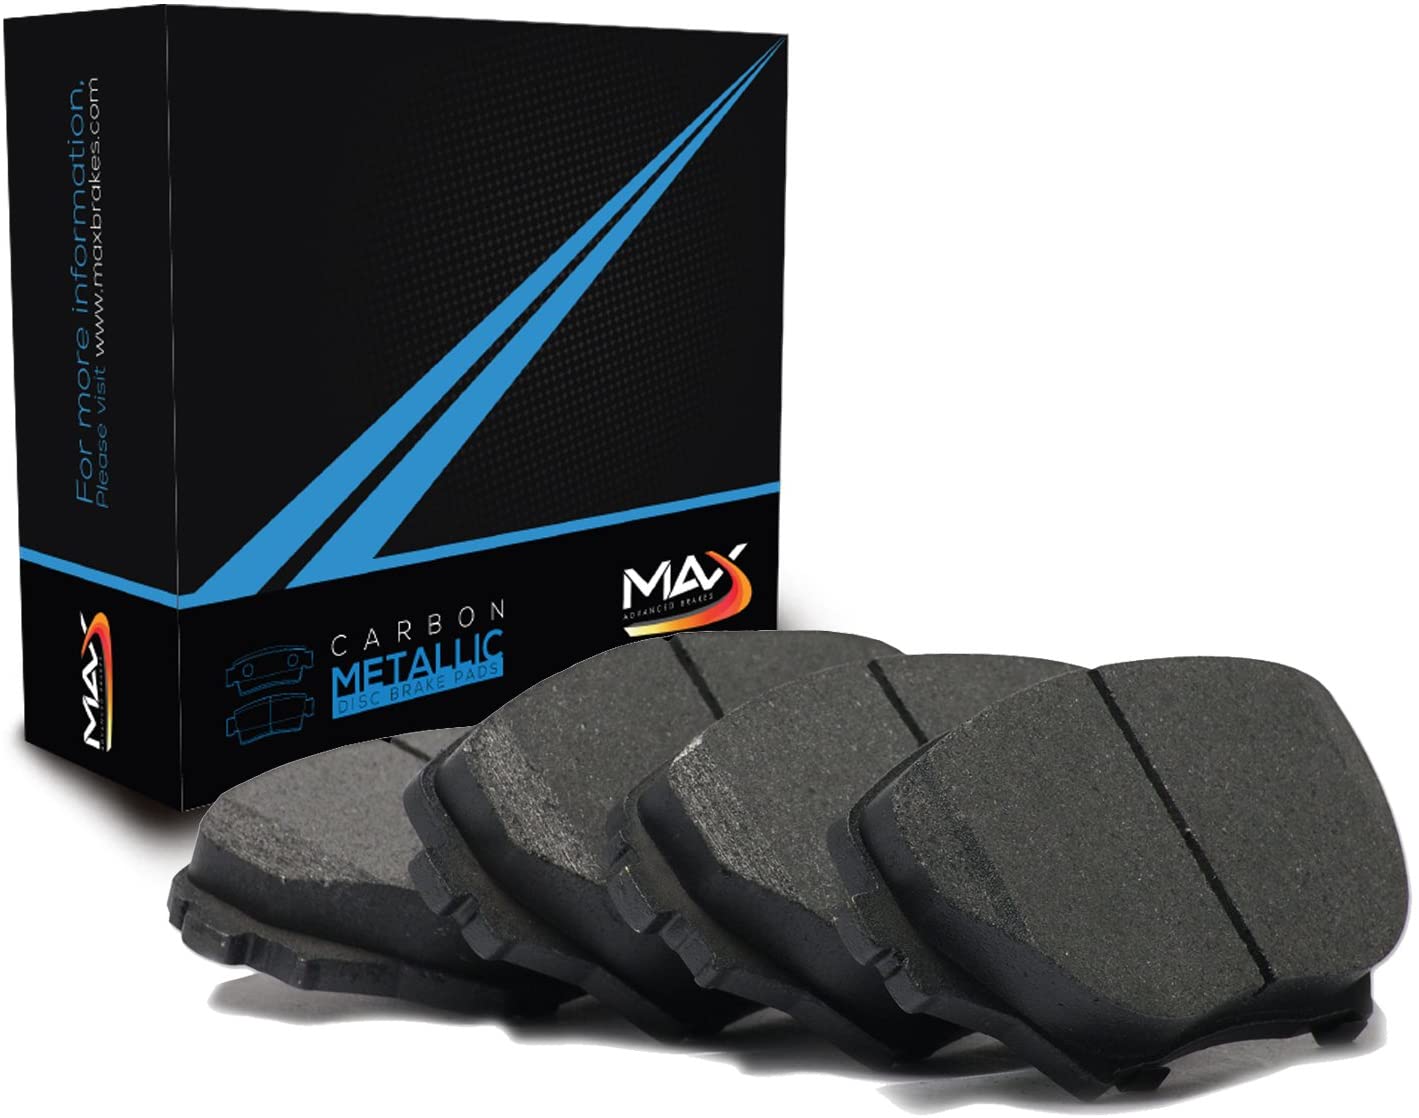 Max Brakes Front Carbon Metallic Performance Disc Brake Pads TA004851 | Fits: 2005 05 Honda Accord Coupe 4 Cylinder; Non Models Built For Canadian Market